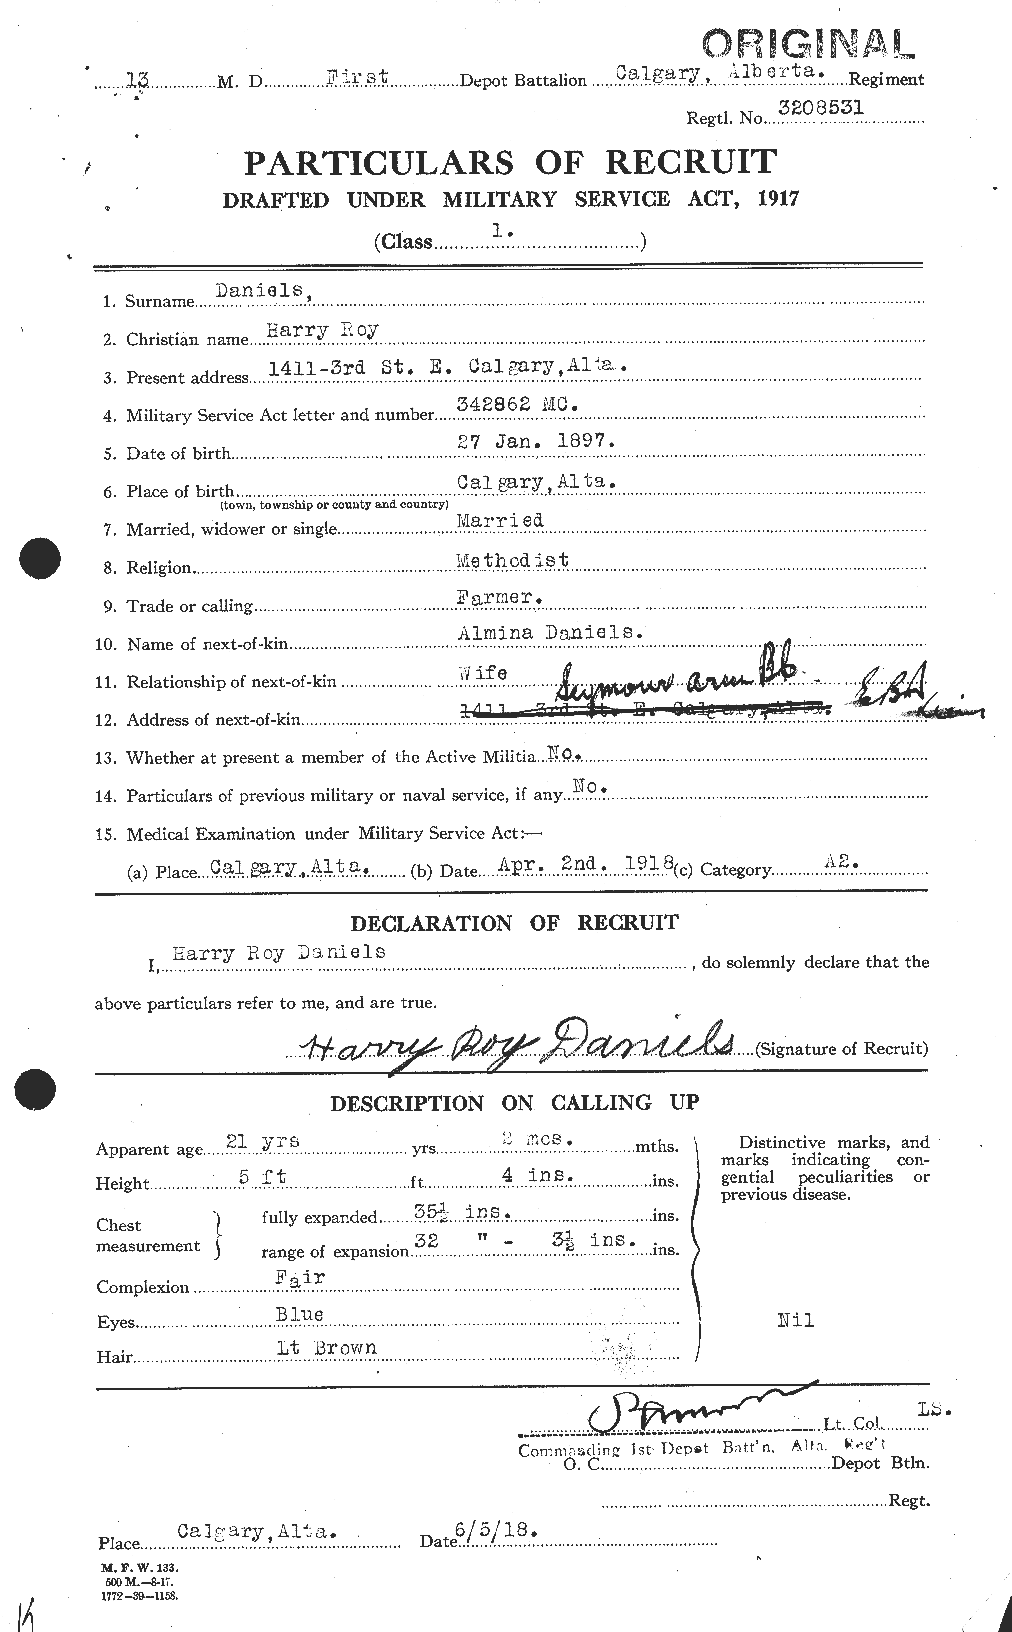 Personnel Records of the First World War - CEF 279612a